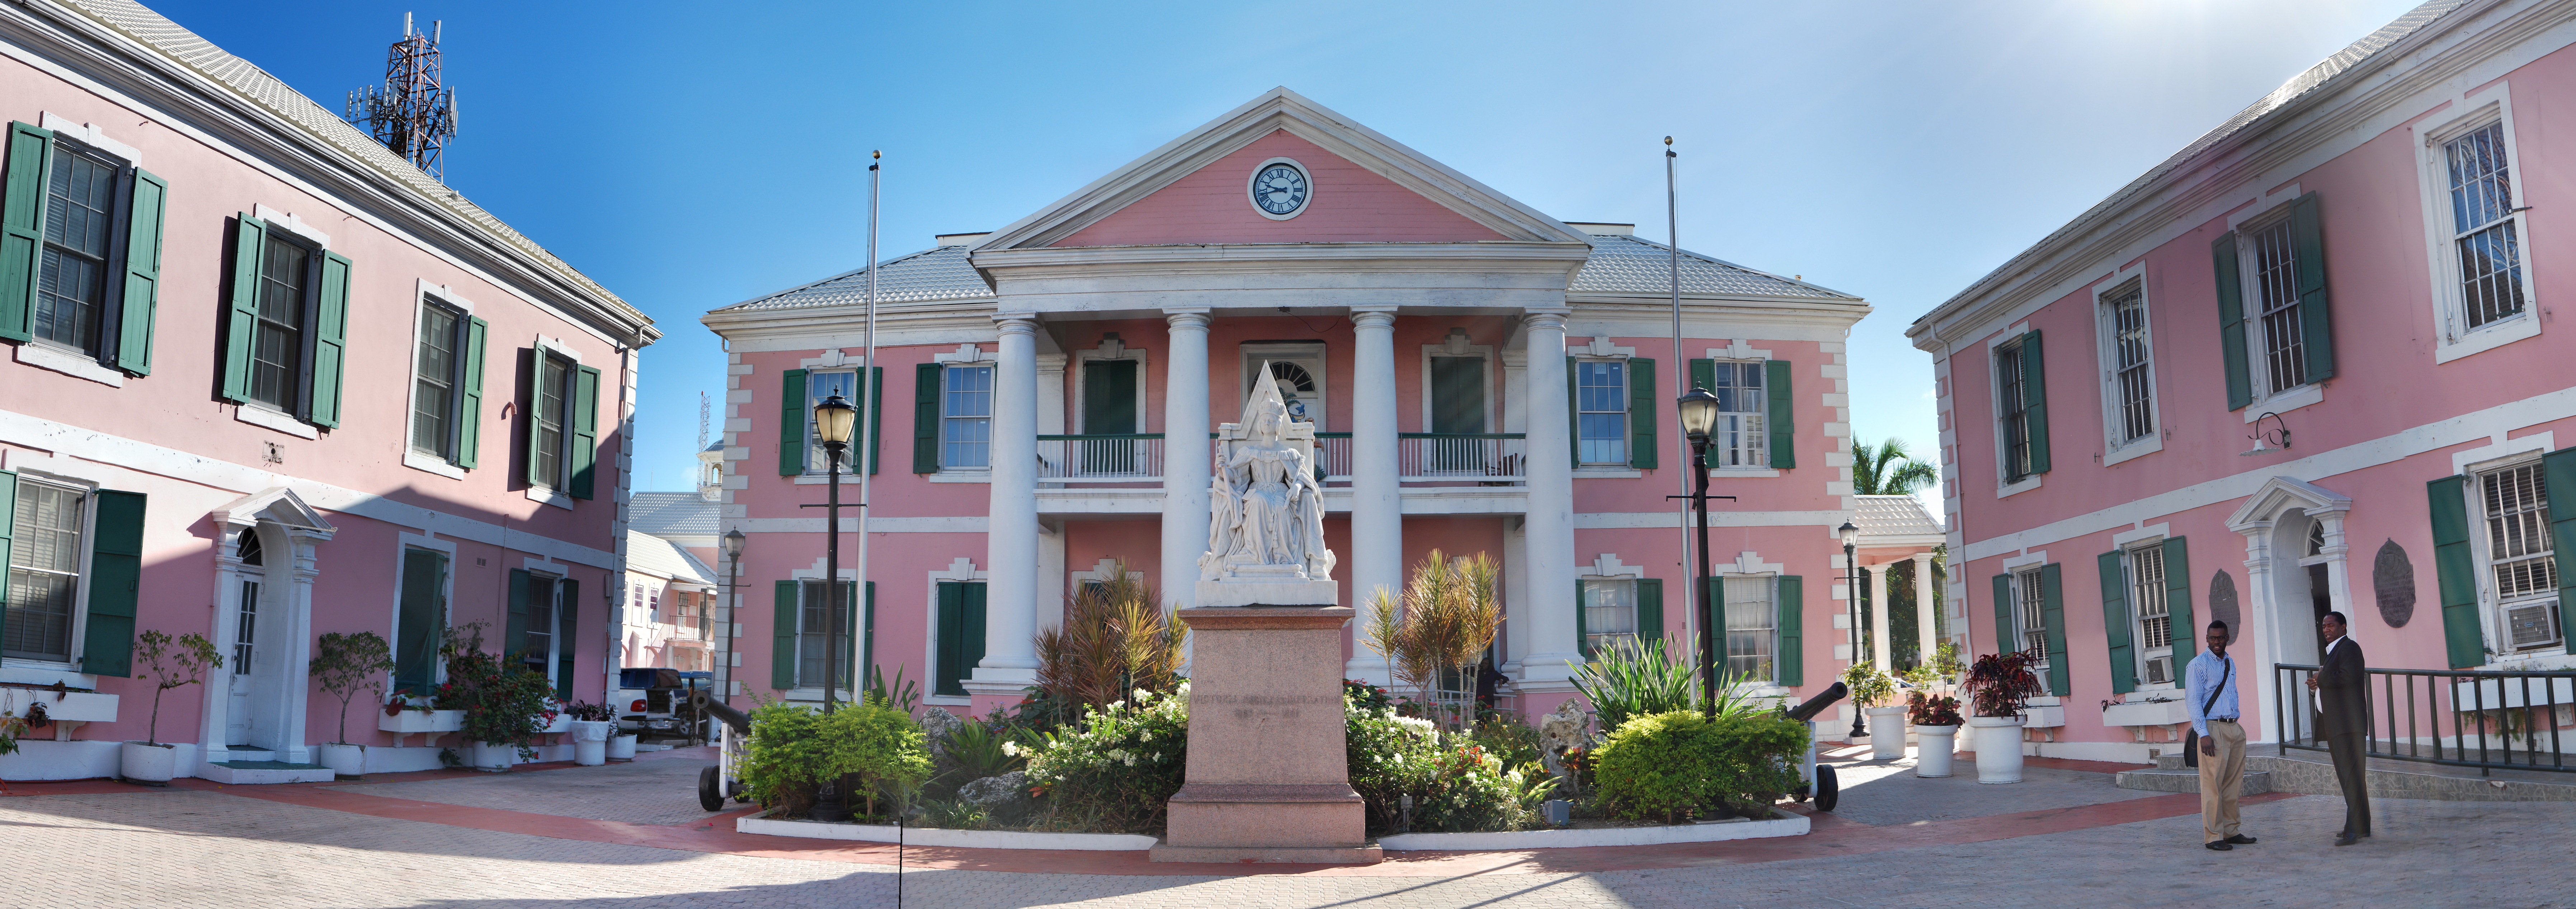 Parliament House of The Bahamas